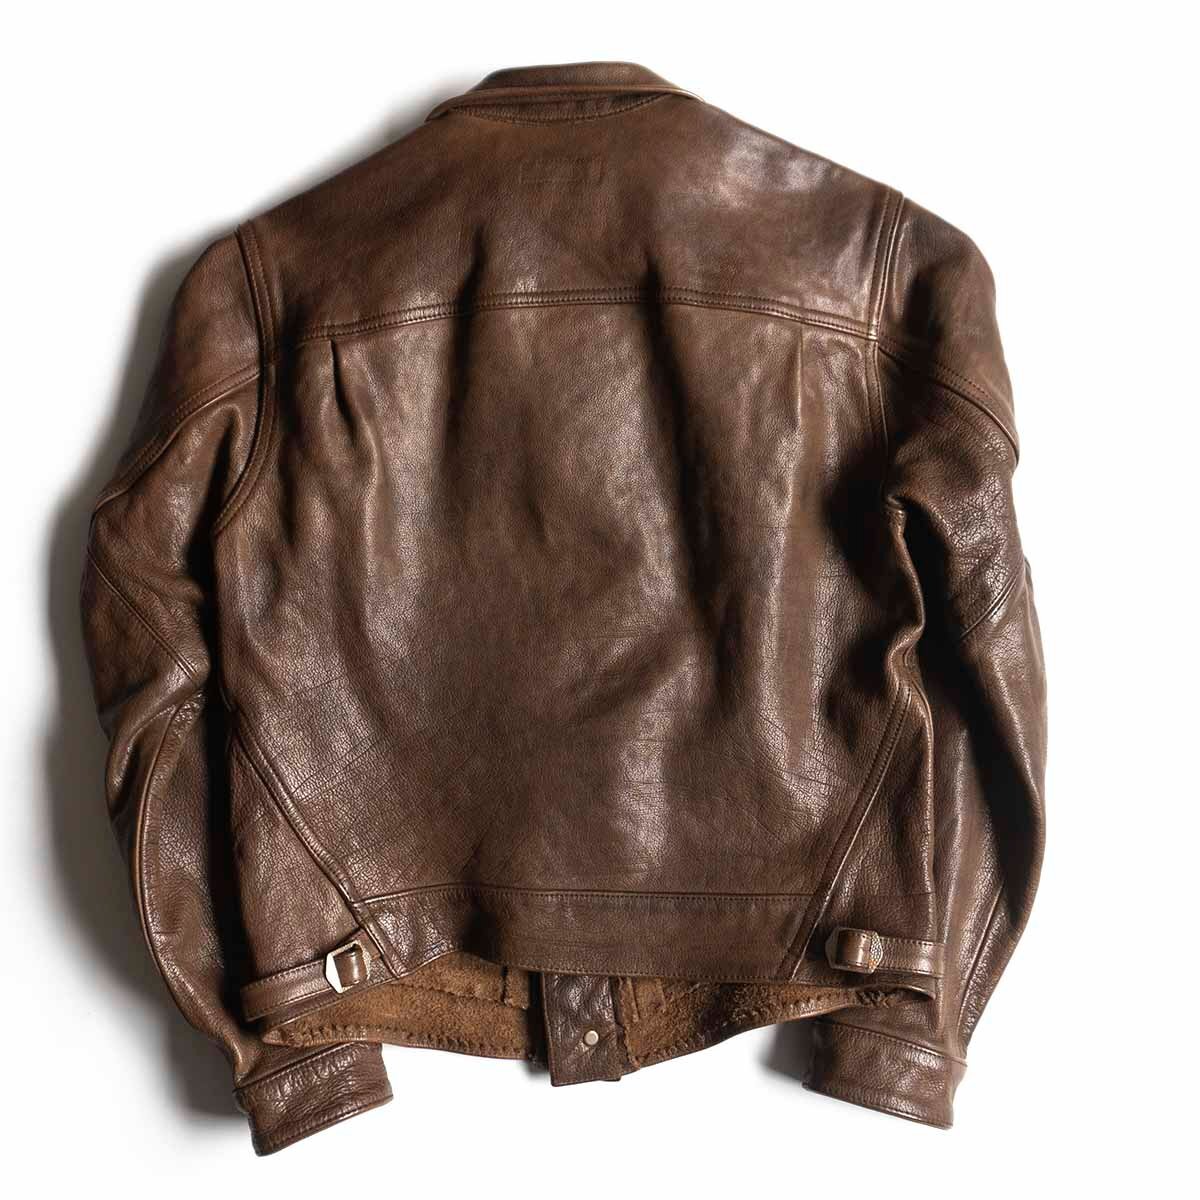 【LIMITED EDITION】 RRL【1ST TYPE LEATHER JACKET】S ファースト レザー ジャケット 2404051_画像2